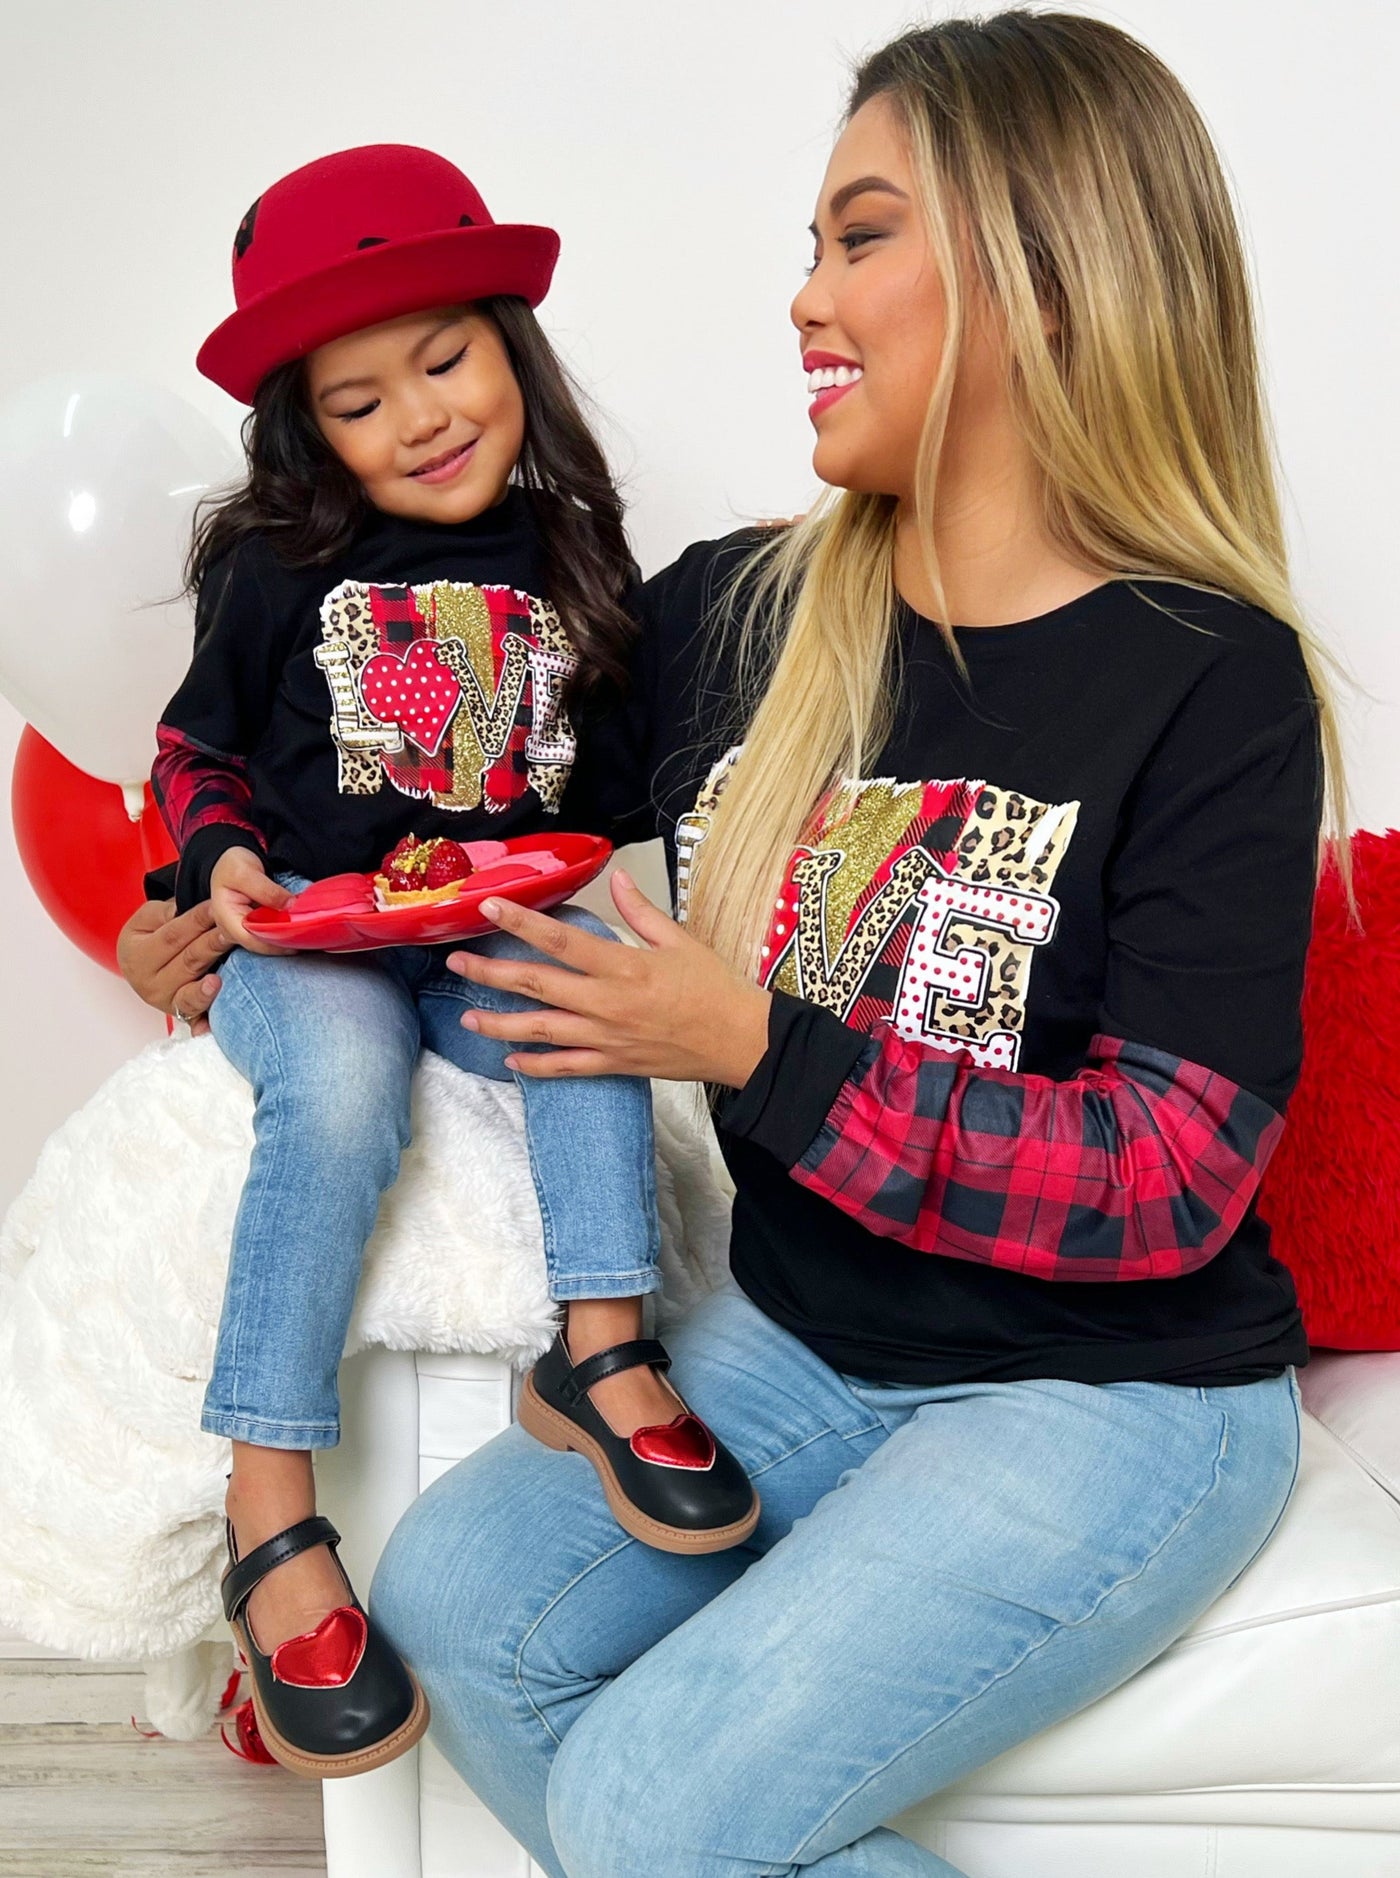 Mommy and Me Matching Tops | Love Mixed Print Tops | Mia Belle Girls